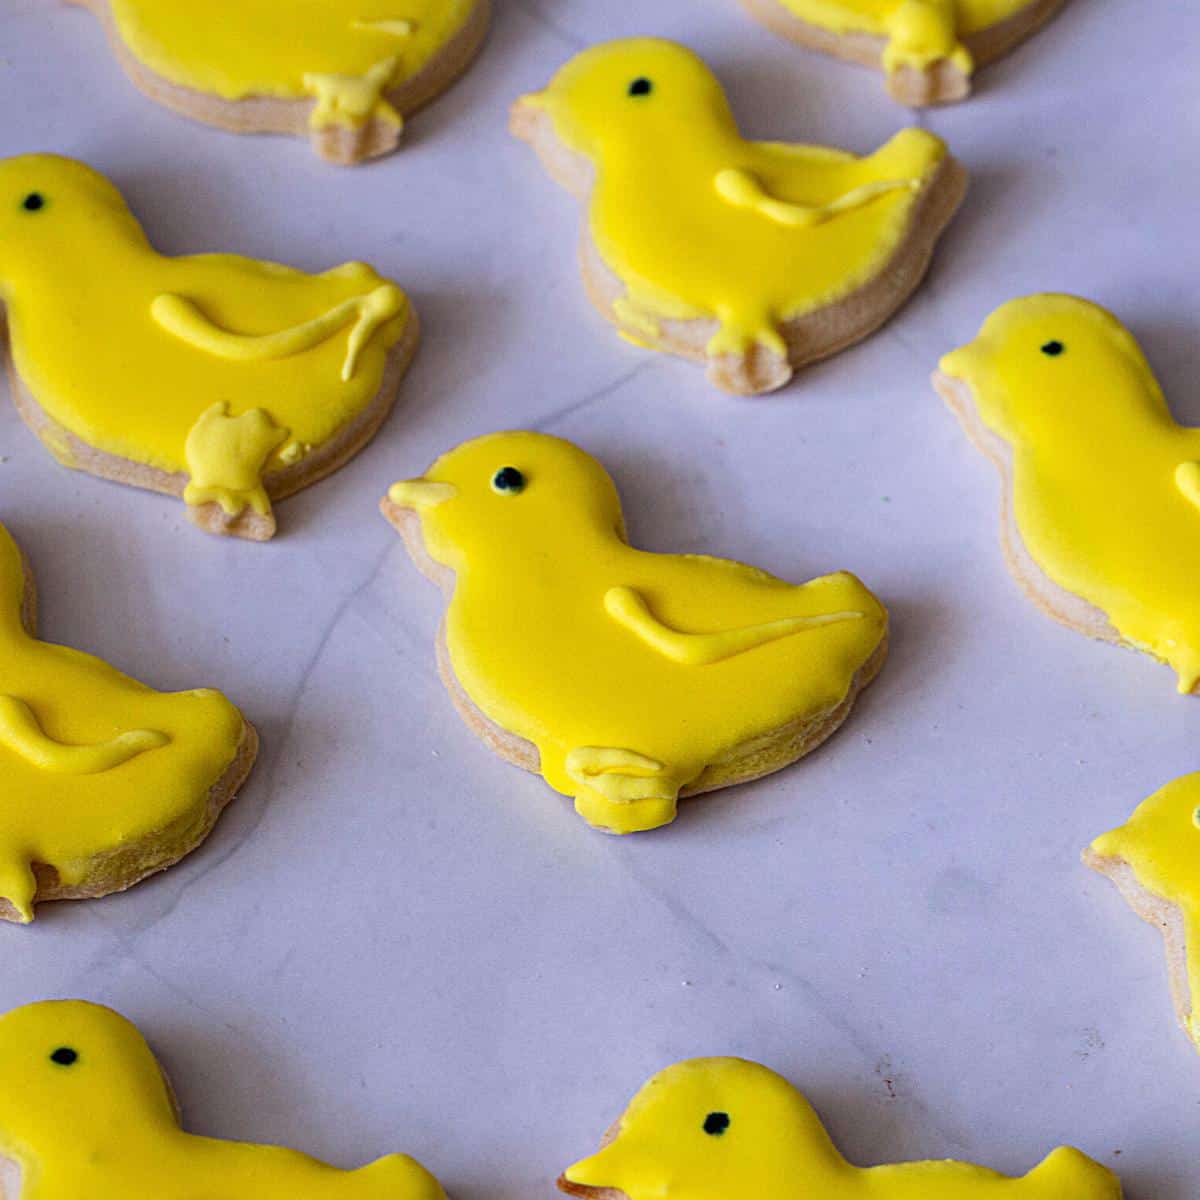 Frosted chick cookies on the table.